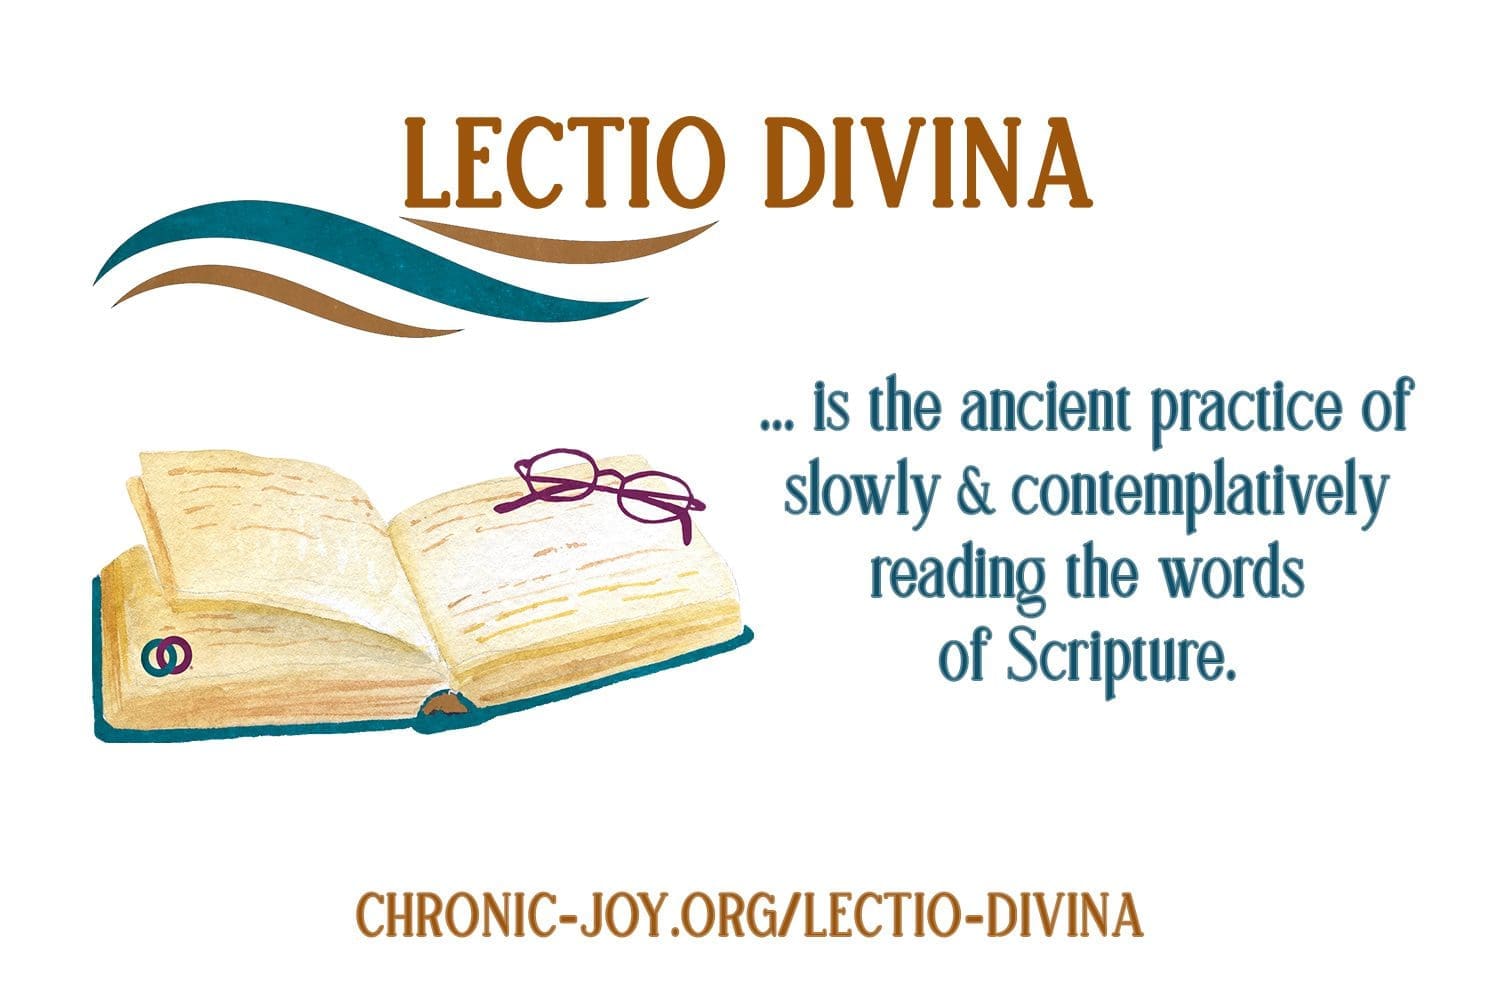 Lectio Divina is the ancient practice of slowly, contemplatively reading the words of Scripture.